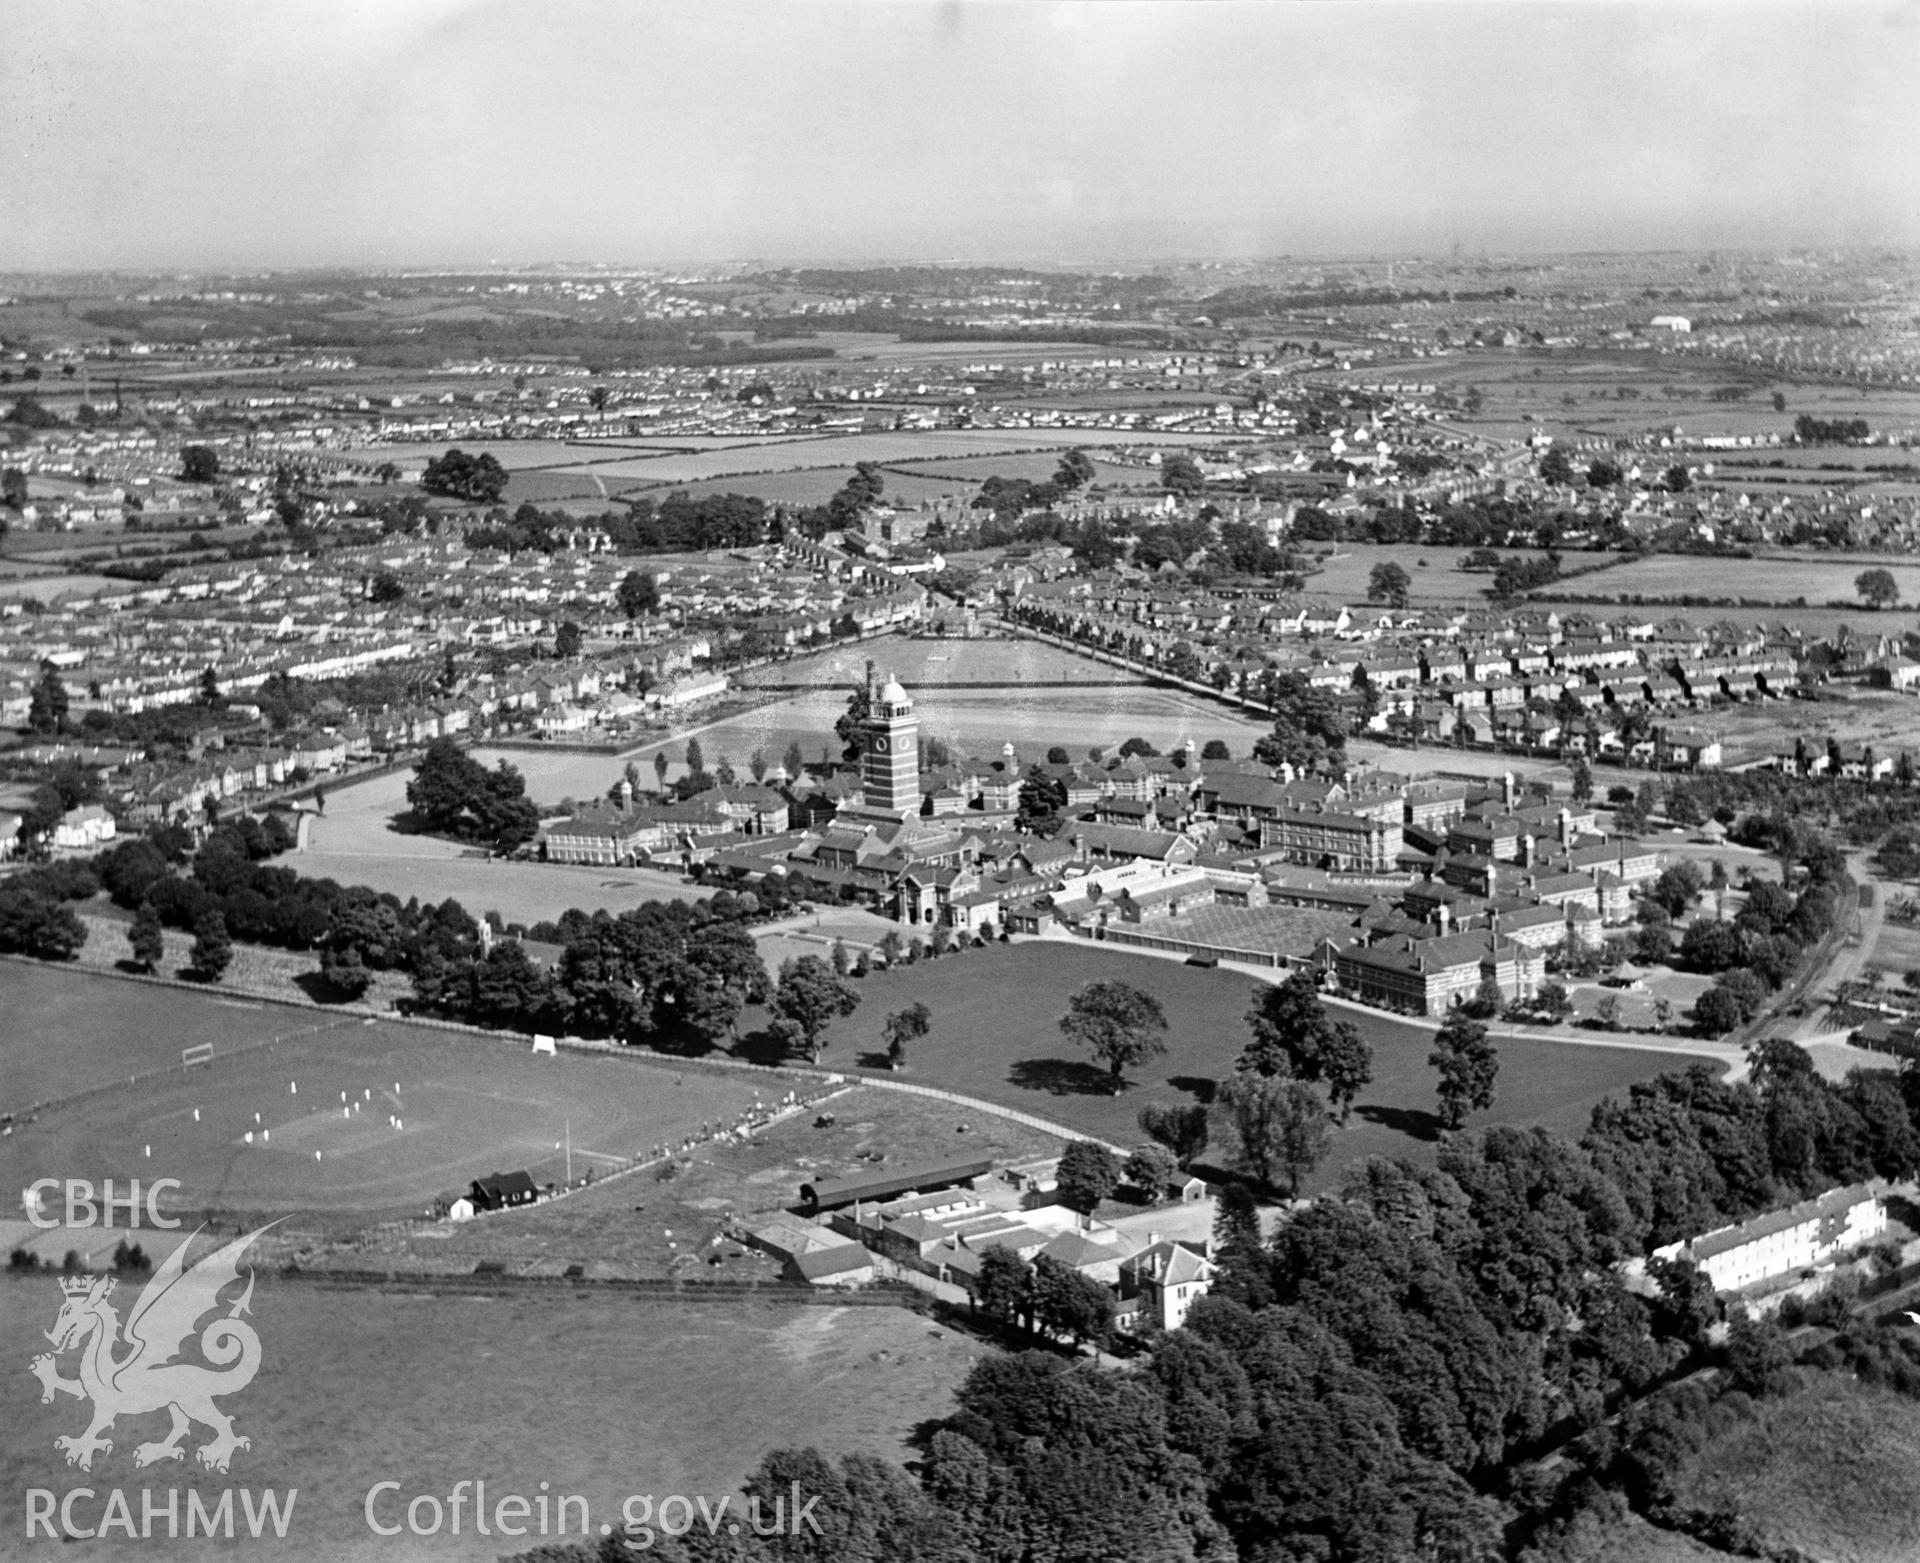 View of Cardiff City Mental Hospital, Whitchurch, showing Whitchurch sports ground, oblique aerial view. 5?x4? black and white glass plate negative.